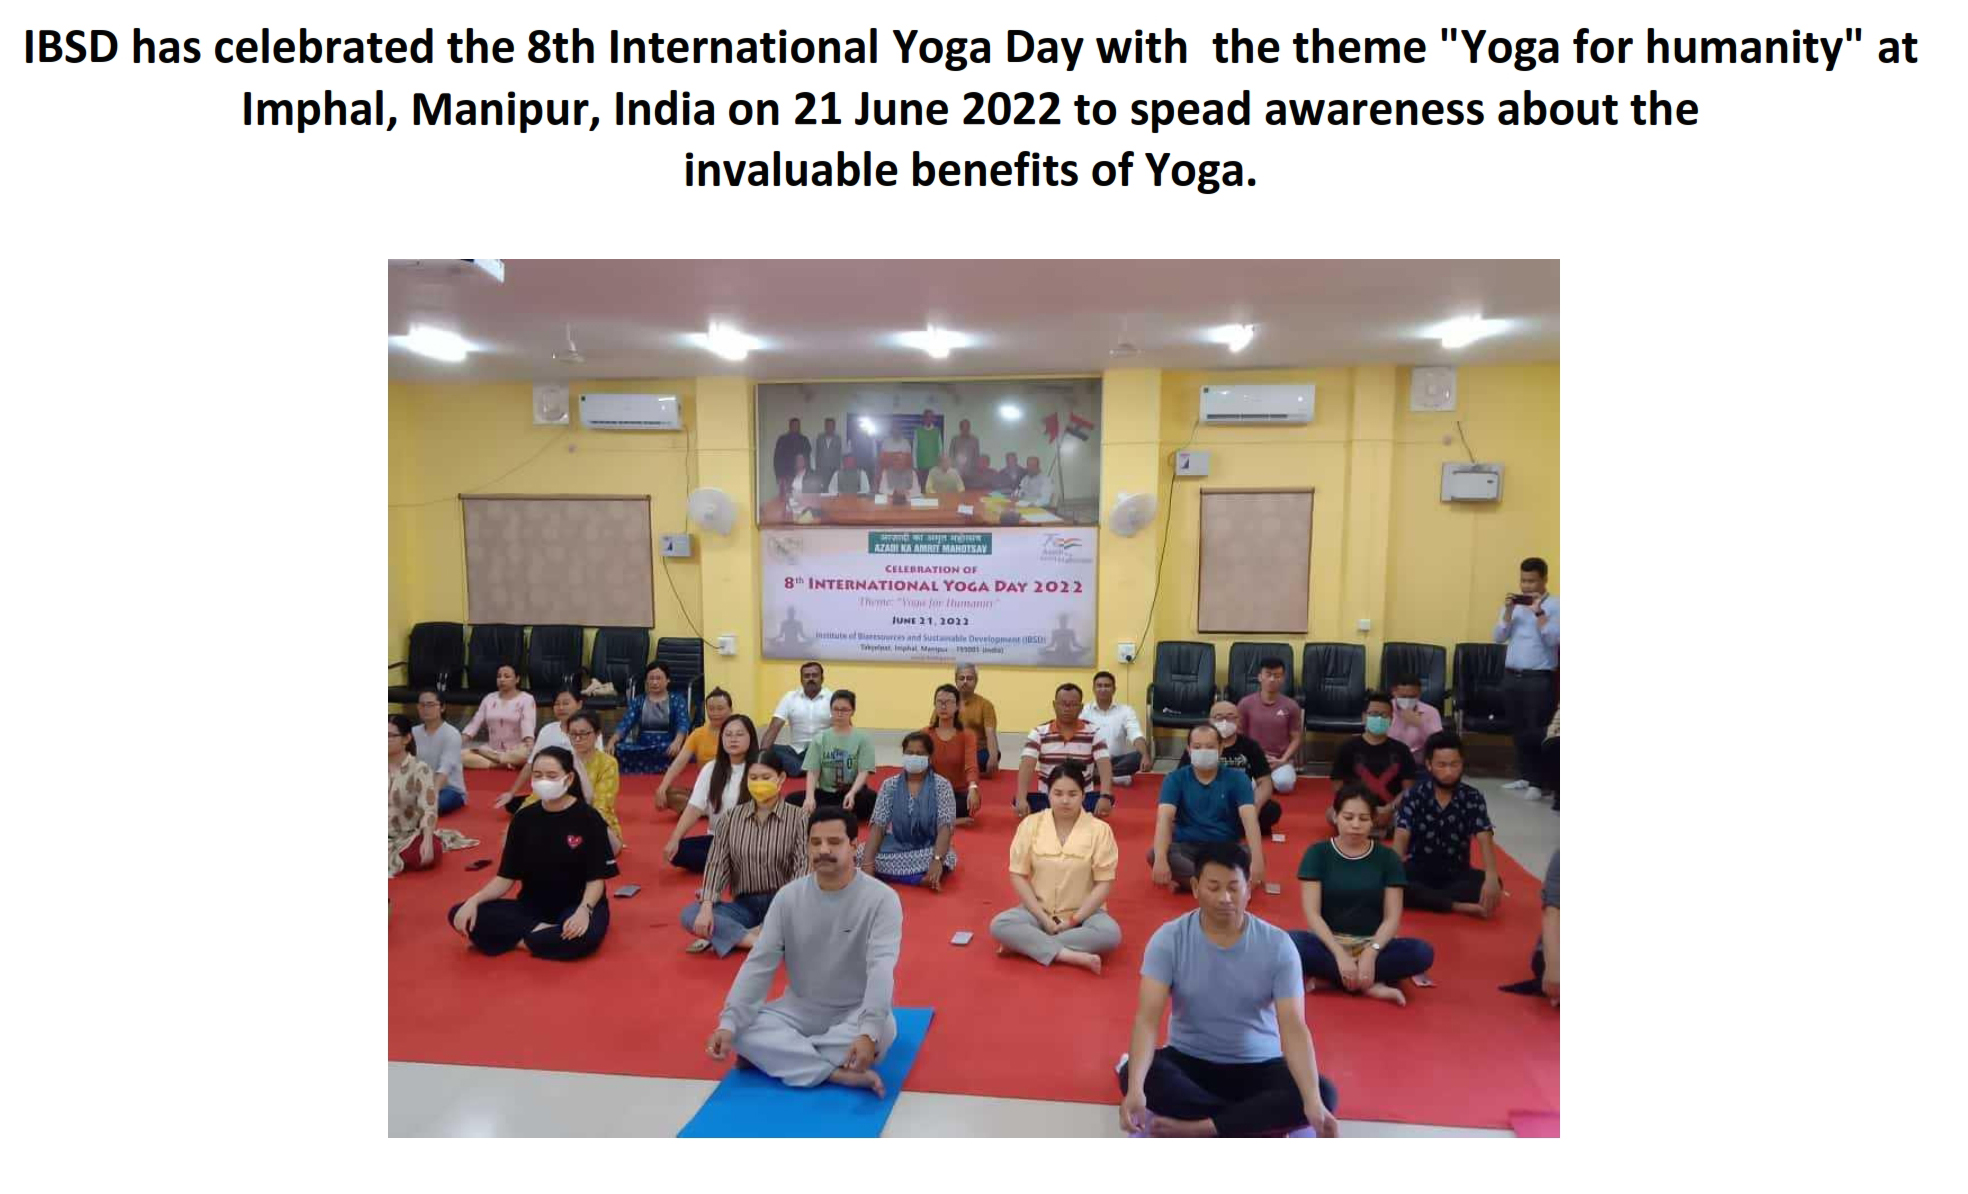 IBSD has celebrated the 8th International Yoga Day with the theme 